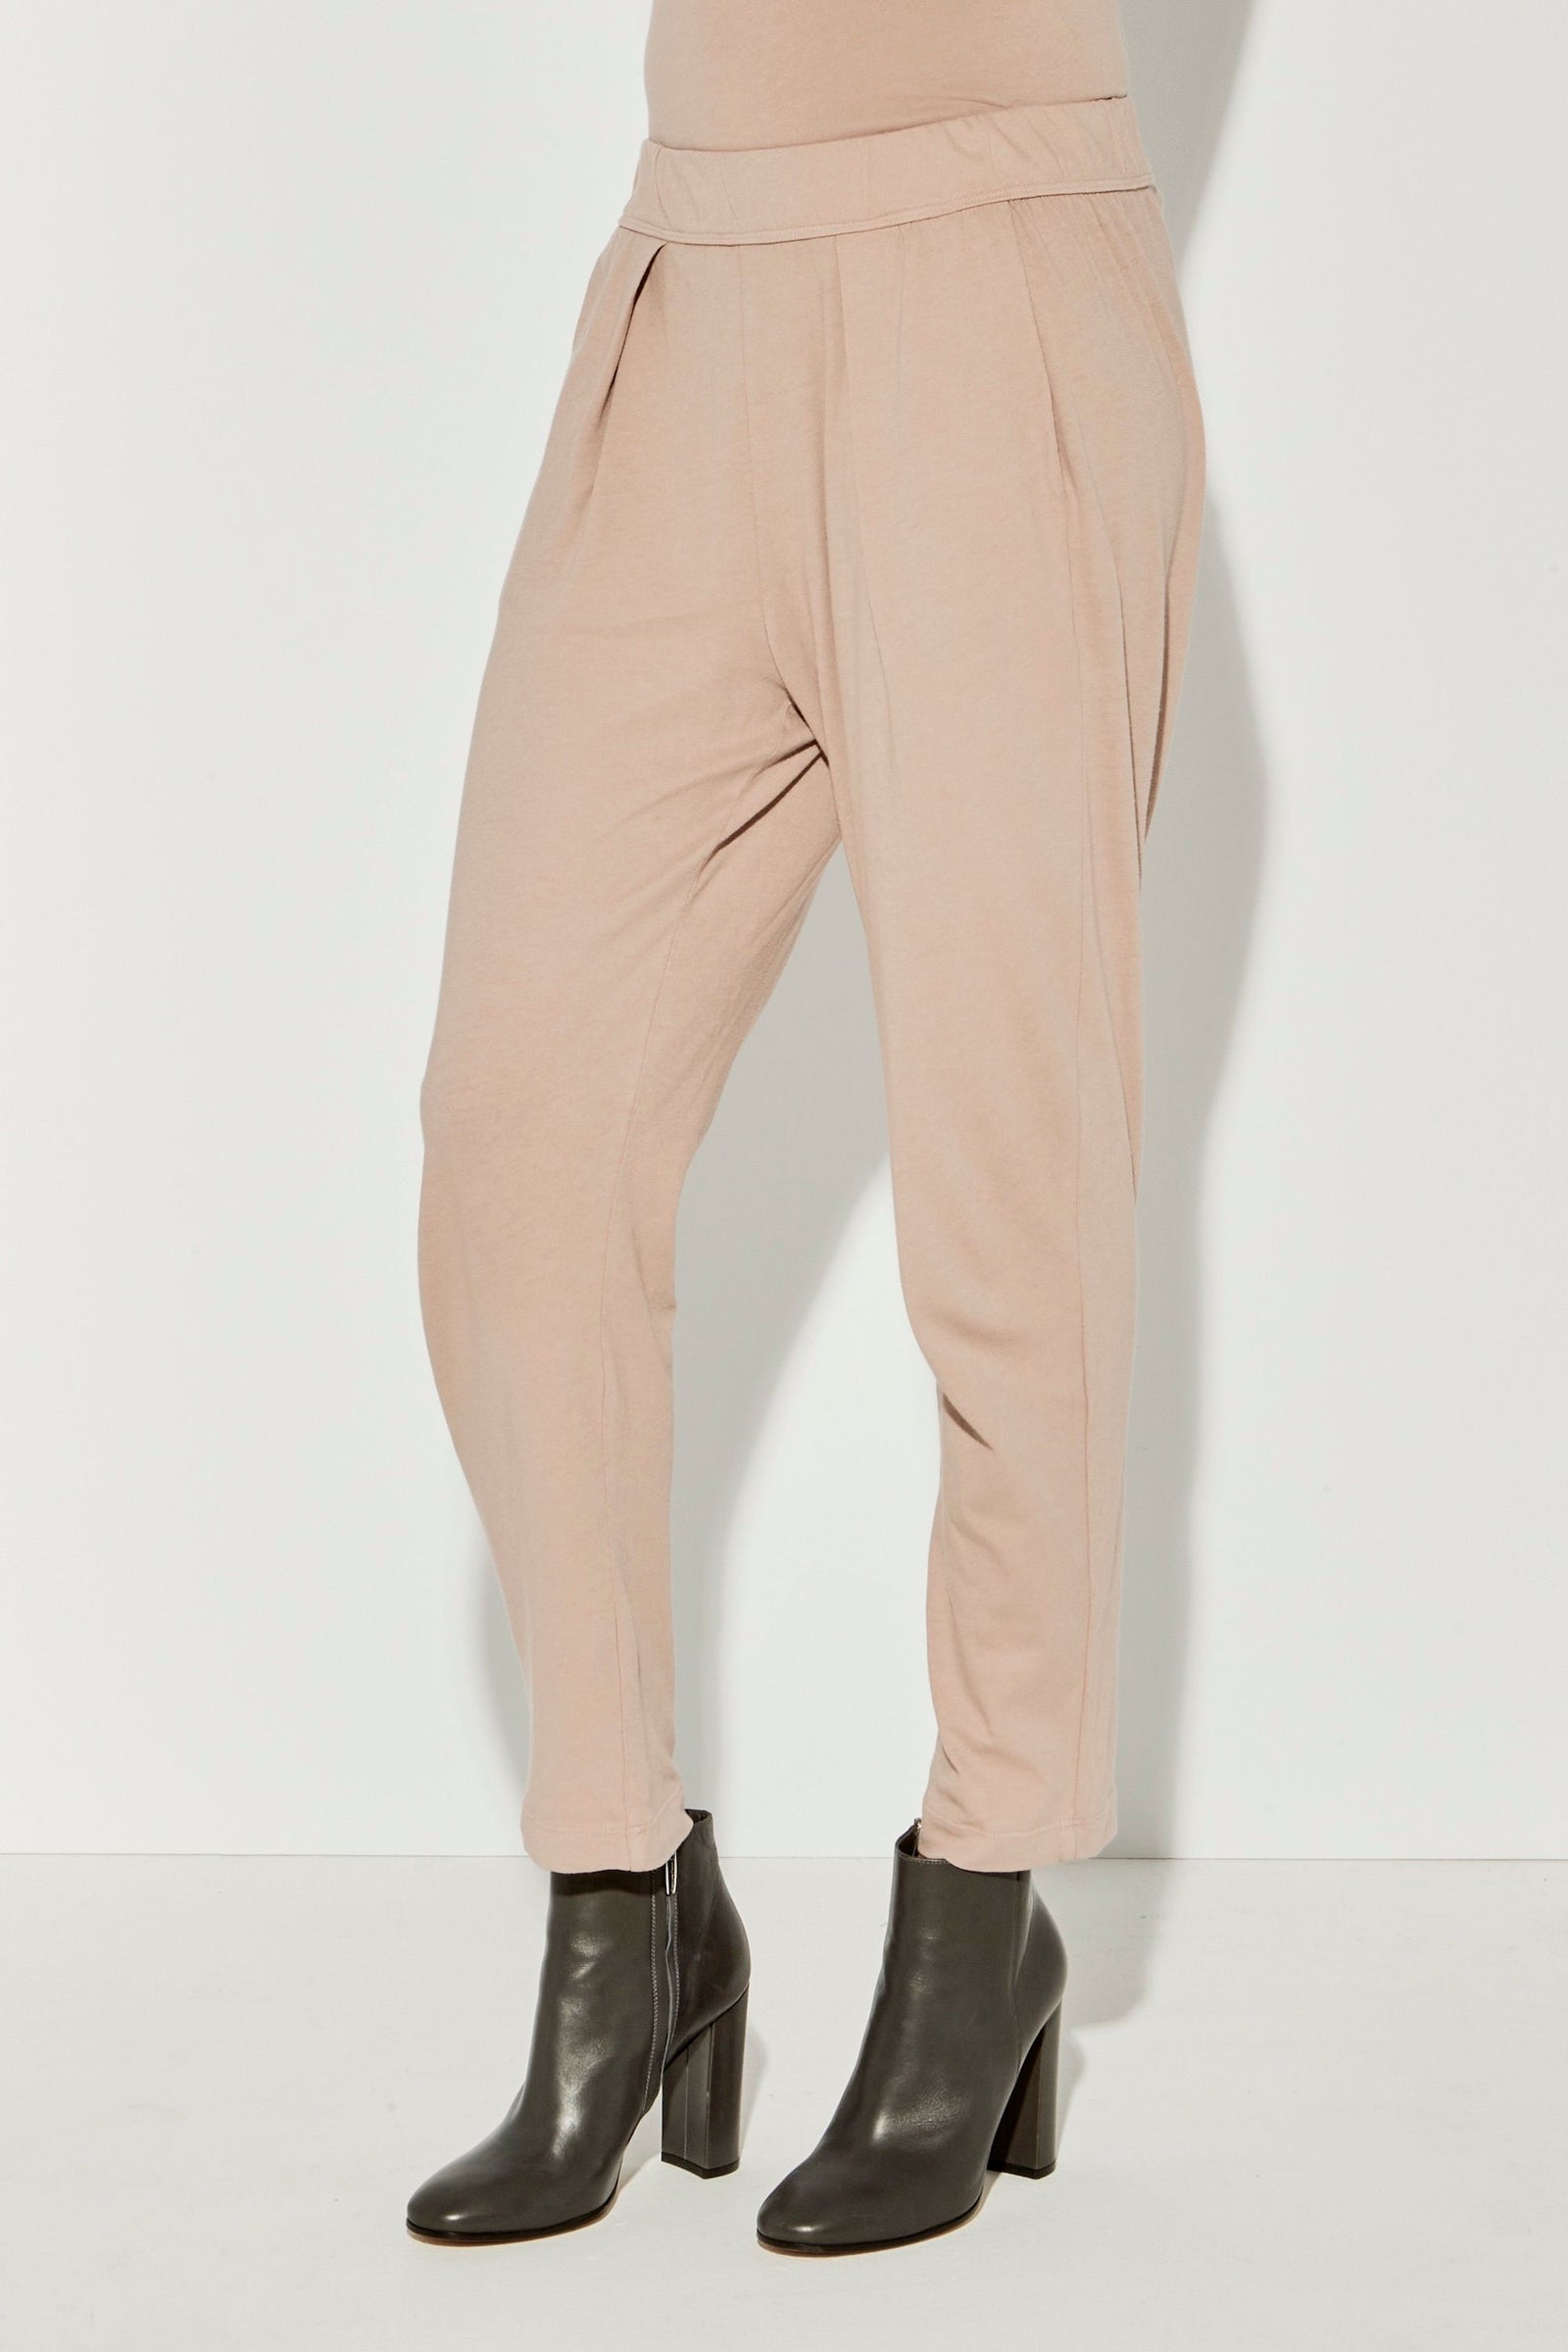 Petal Pink Classic Jersey Easy Pant Full Side View